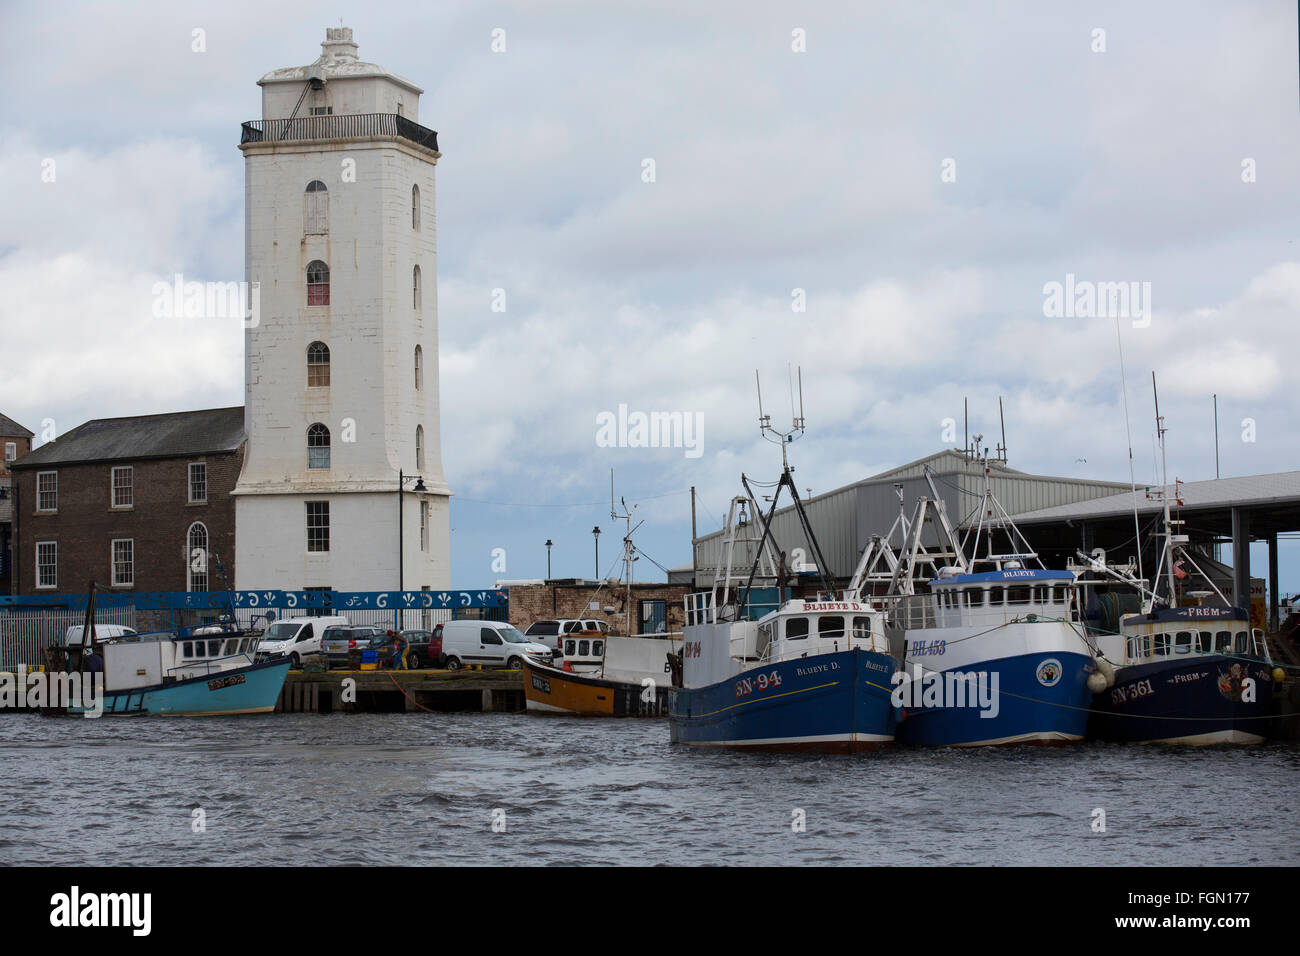 Fishing boats at the North Shields Fish Quay in north-east England. The Low Light tower overlooks the harbour. Stock Photo